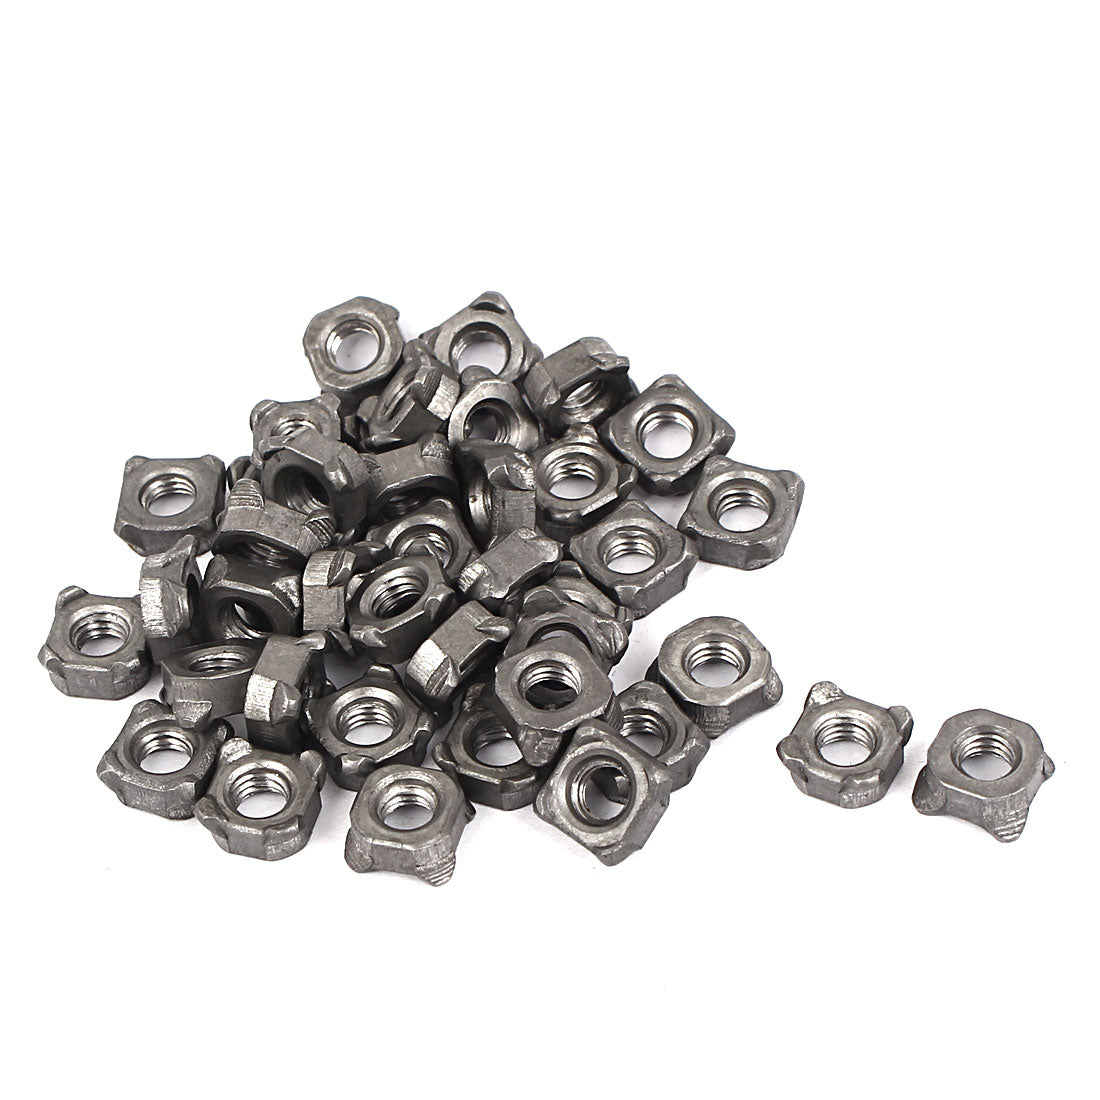 Uxcell Uxcell Weld Nuts,M10 Square UNC Carbon Steel Machine Screw Gray 40Pcs